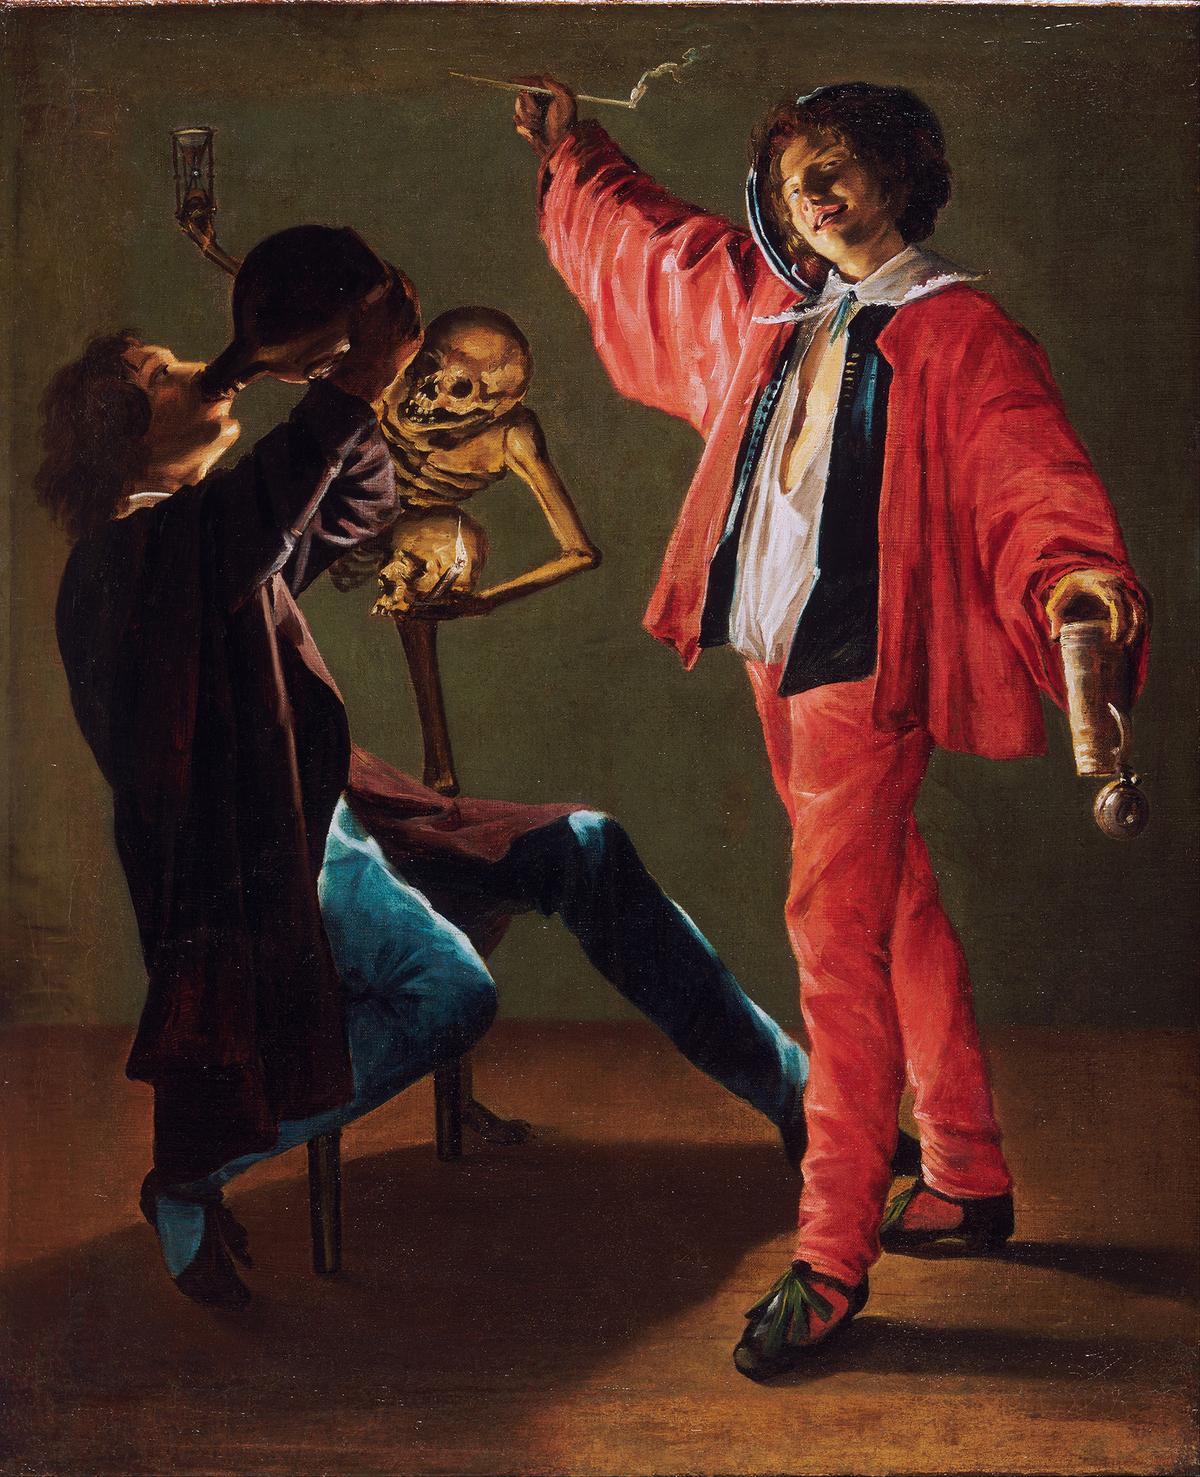 The self-indulgence of drink is vanity. "The Last Drop," circa 1629, by Judith Leyster. Philadelphia Museum of Art. (Public Domain)